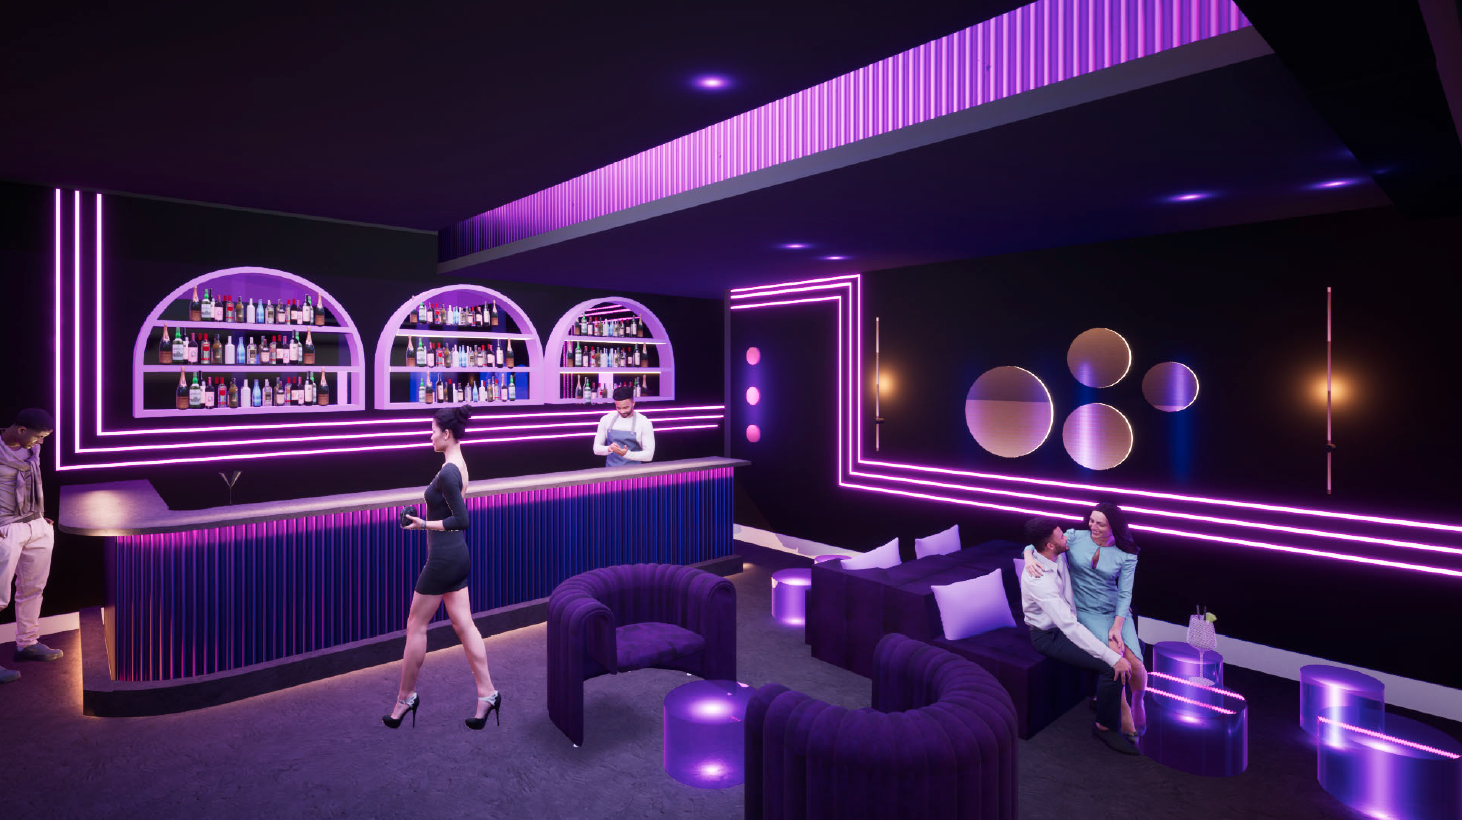 Need help with finding a background - nightclub exterior - Art Resources -  Episode Forums